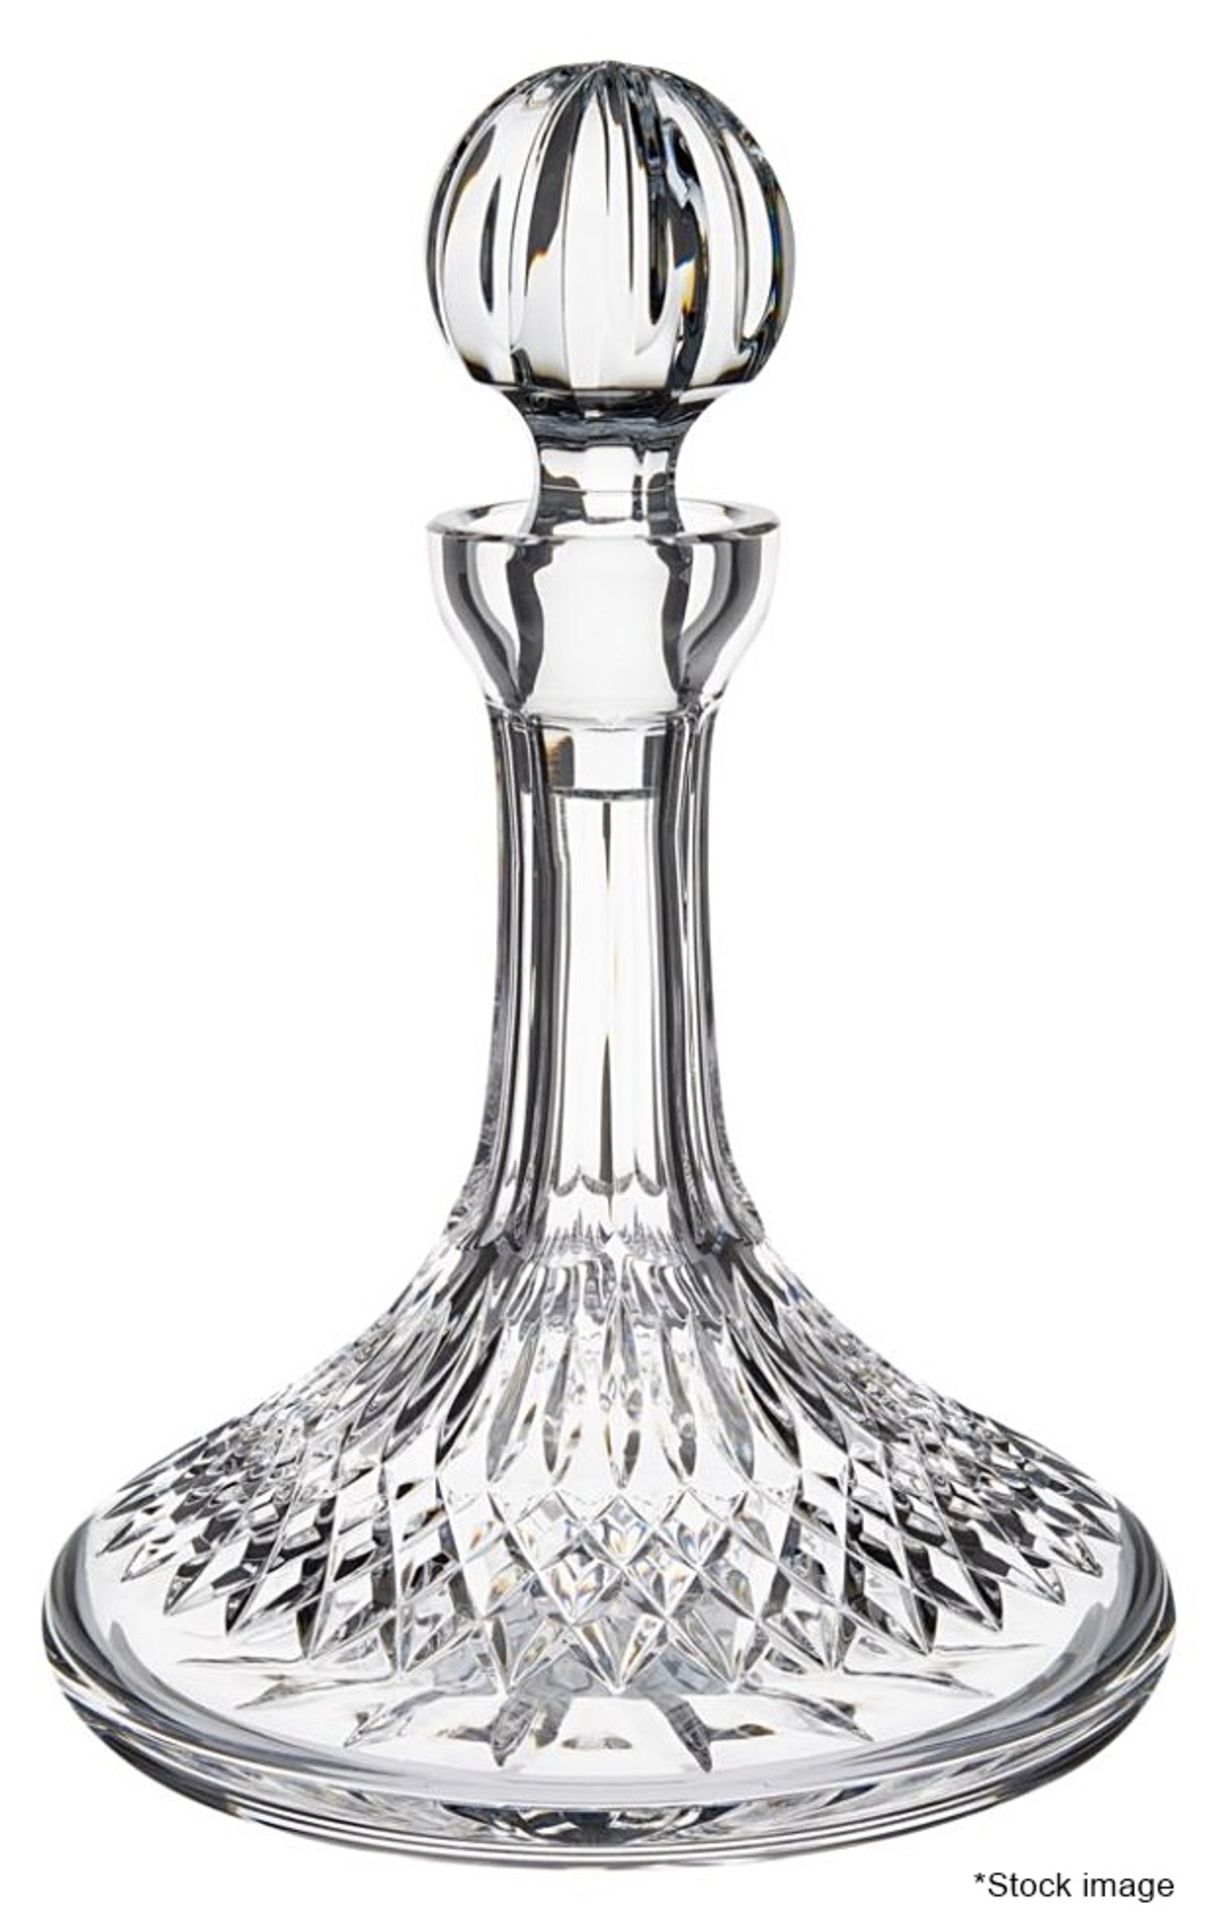 1 x WATERFORD 'Lismore' Lead Crystal Ships Decanter (850ml) - Original Price £450.00 - Boxed - Image 9 of 9